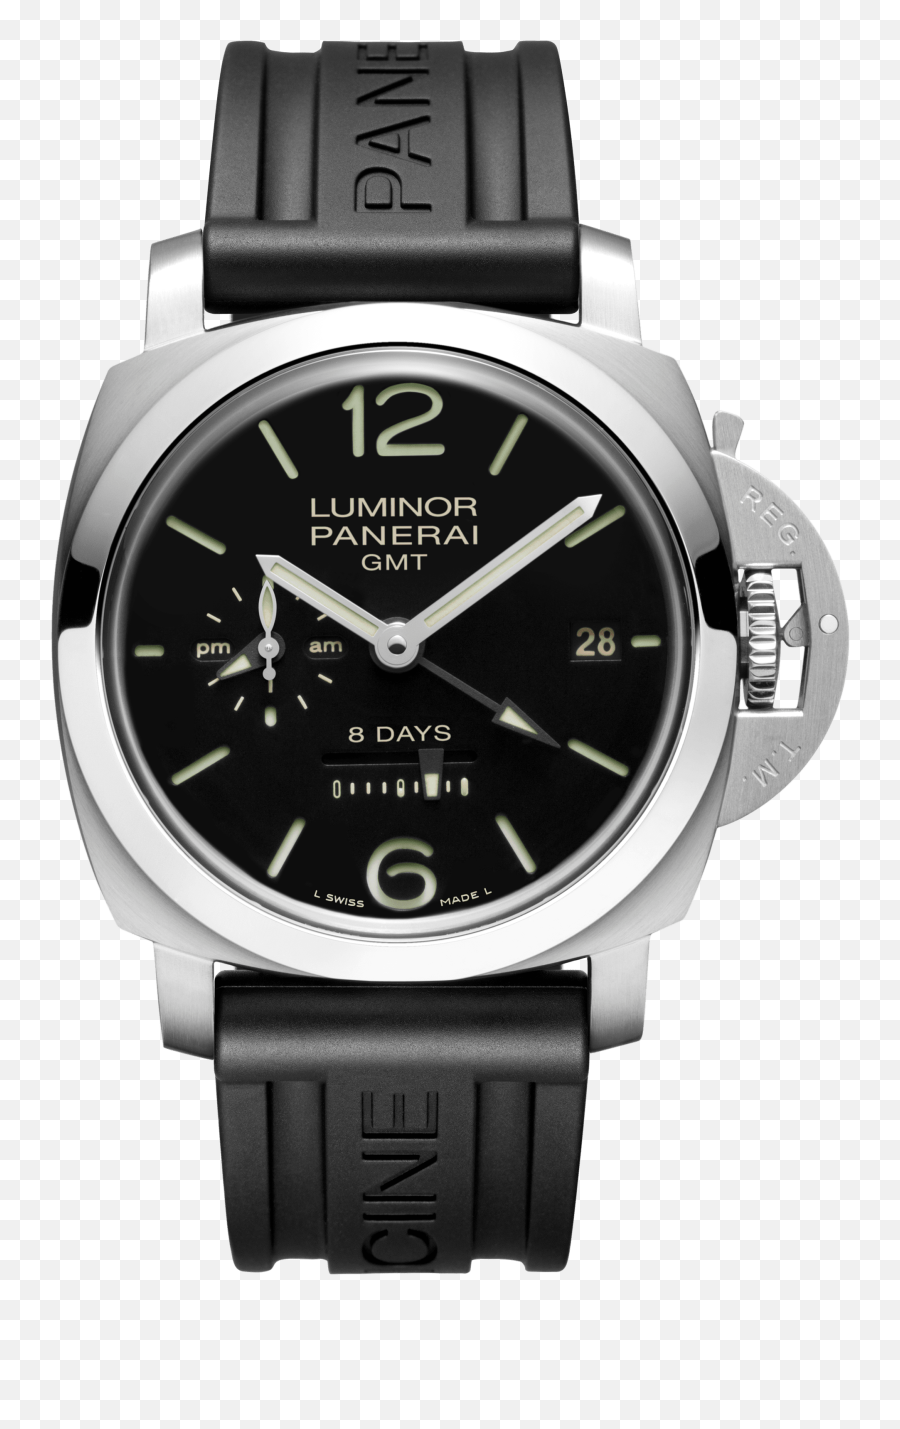 Mary Td Mens Replica Watch O201621 - Panerai Luminor Gmt 8 Days Png,Cd Icon Dior Onyx Necklace